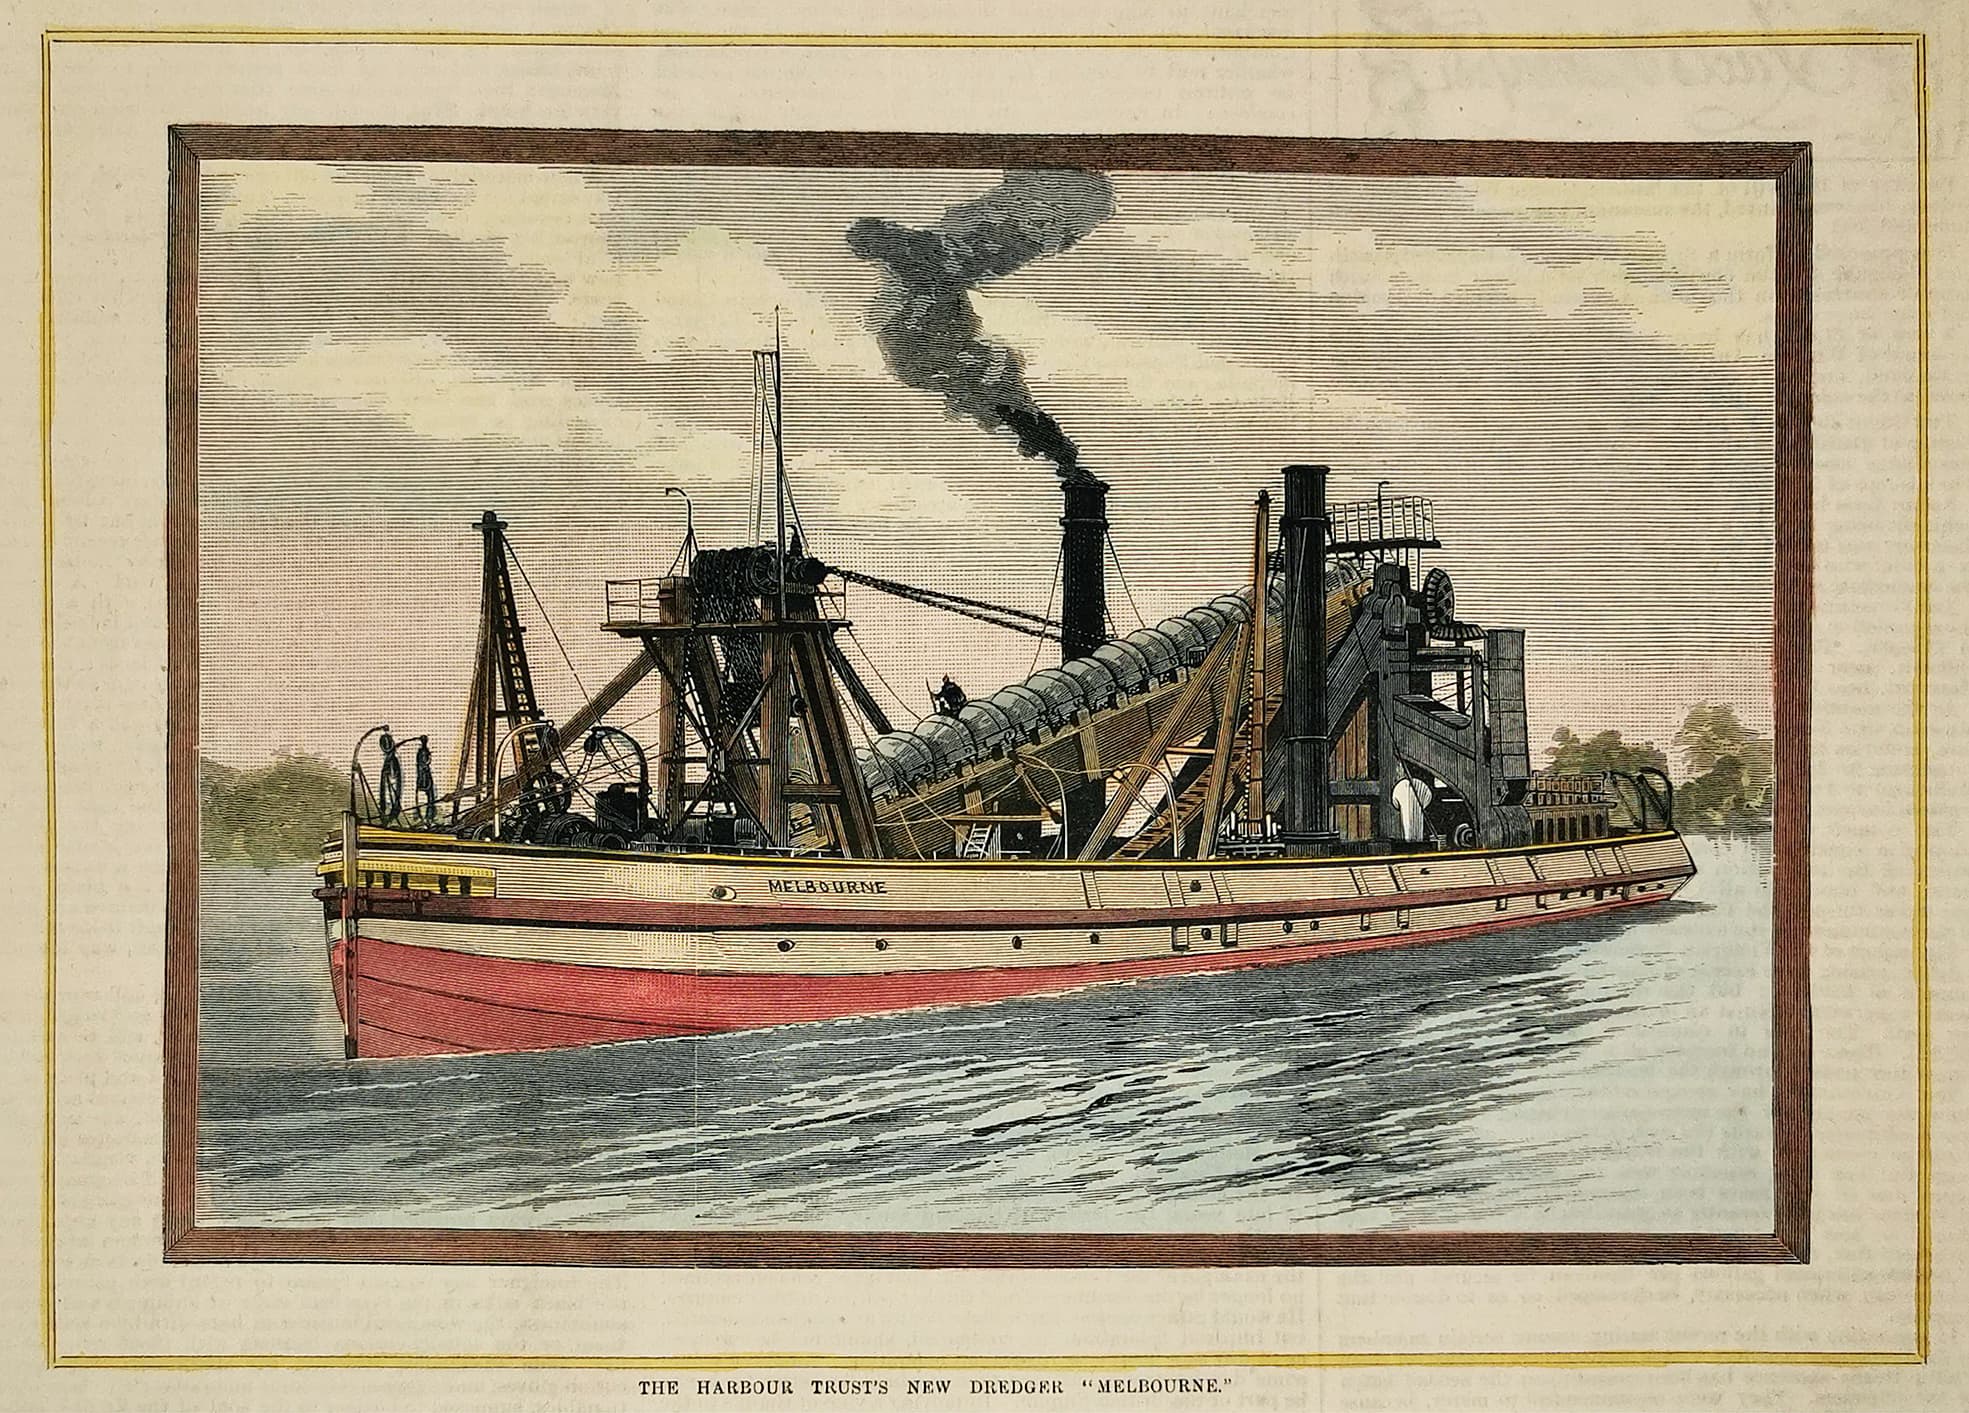 The Harbour Trust's New Dredger "Melbourne." - Antique Print from 1885